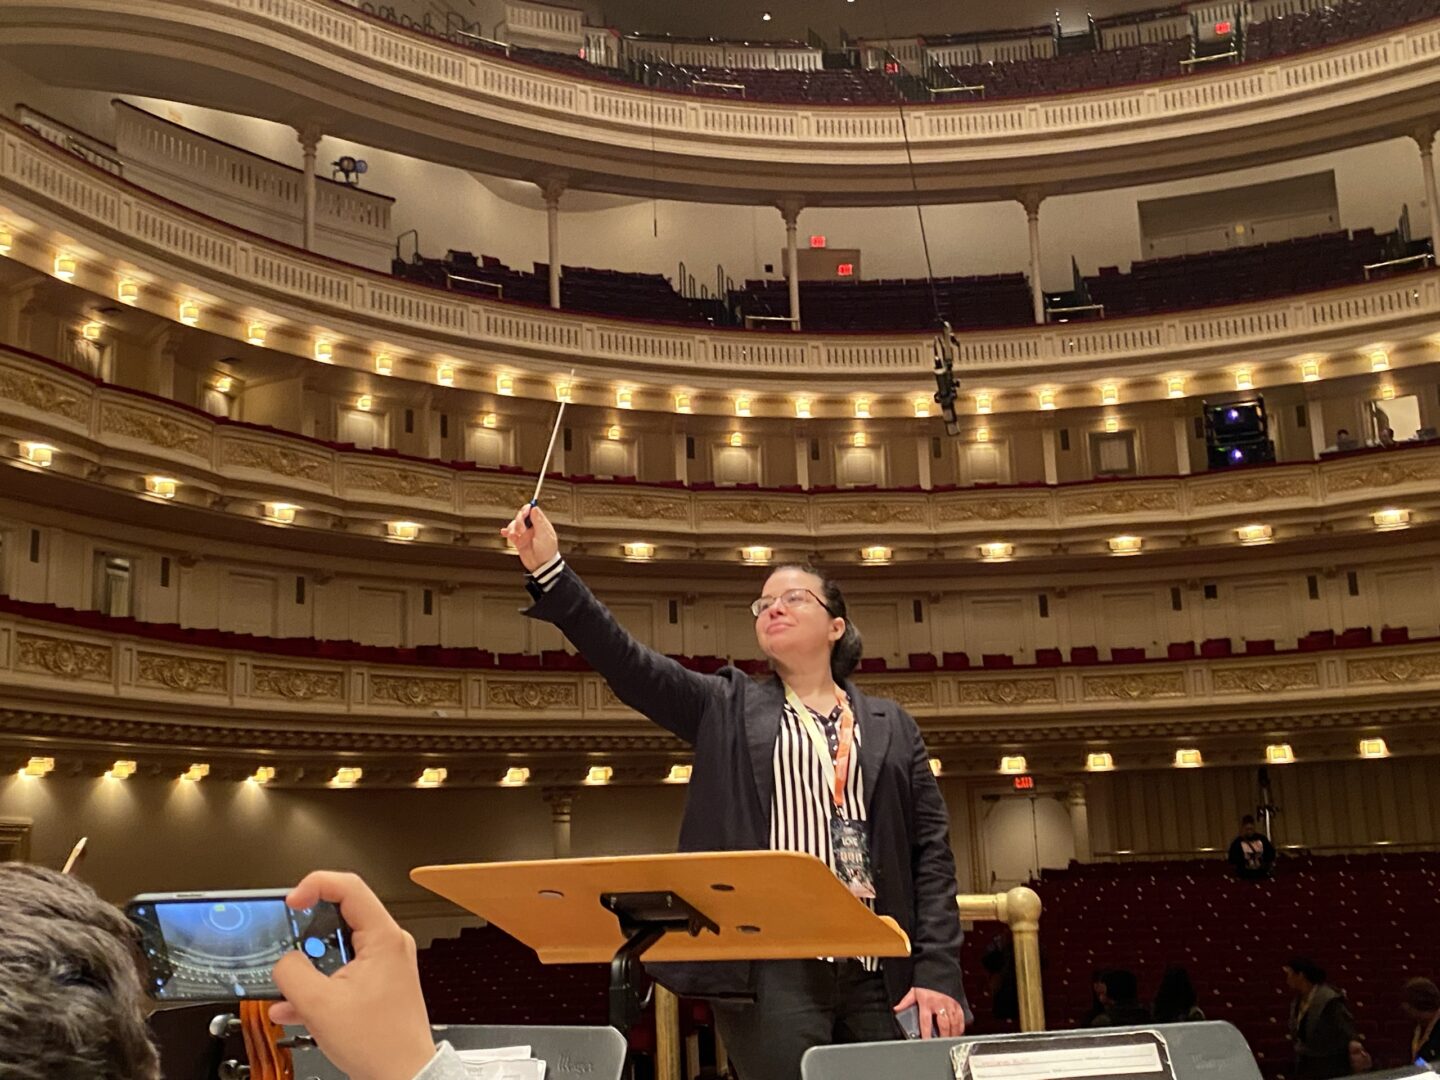 Amanda Chavez with her baton in the air inside Carnegie Hall